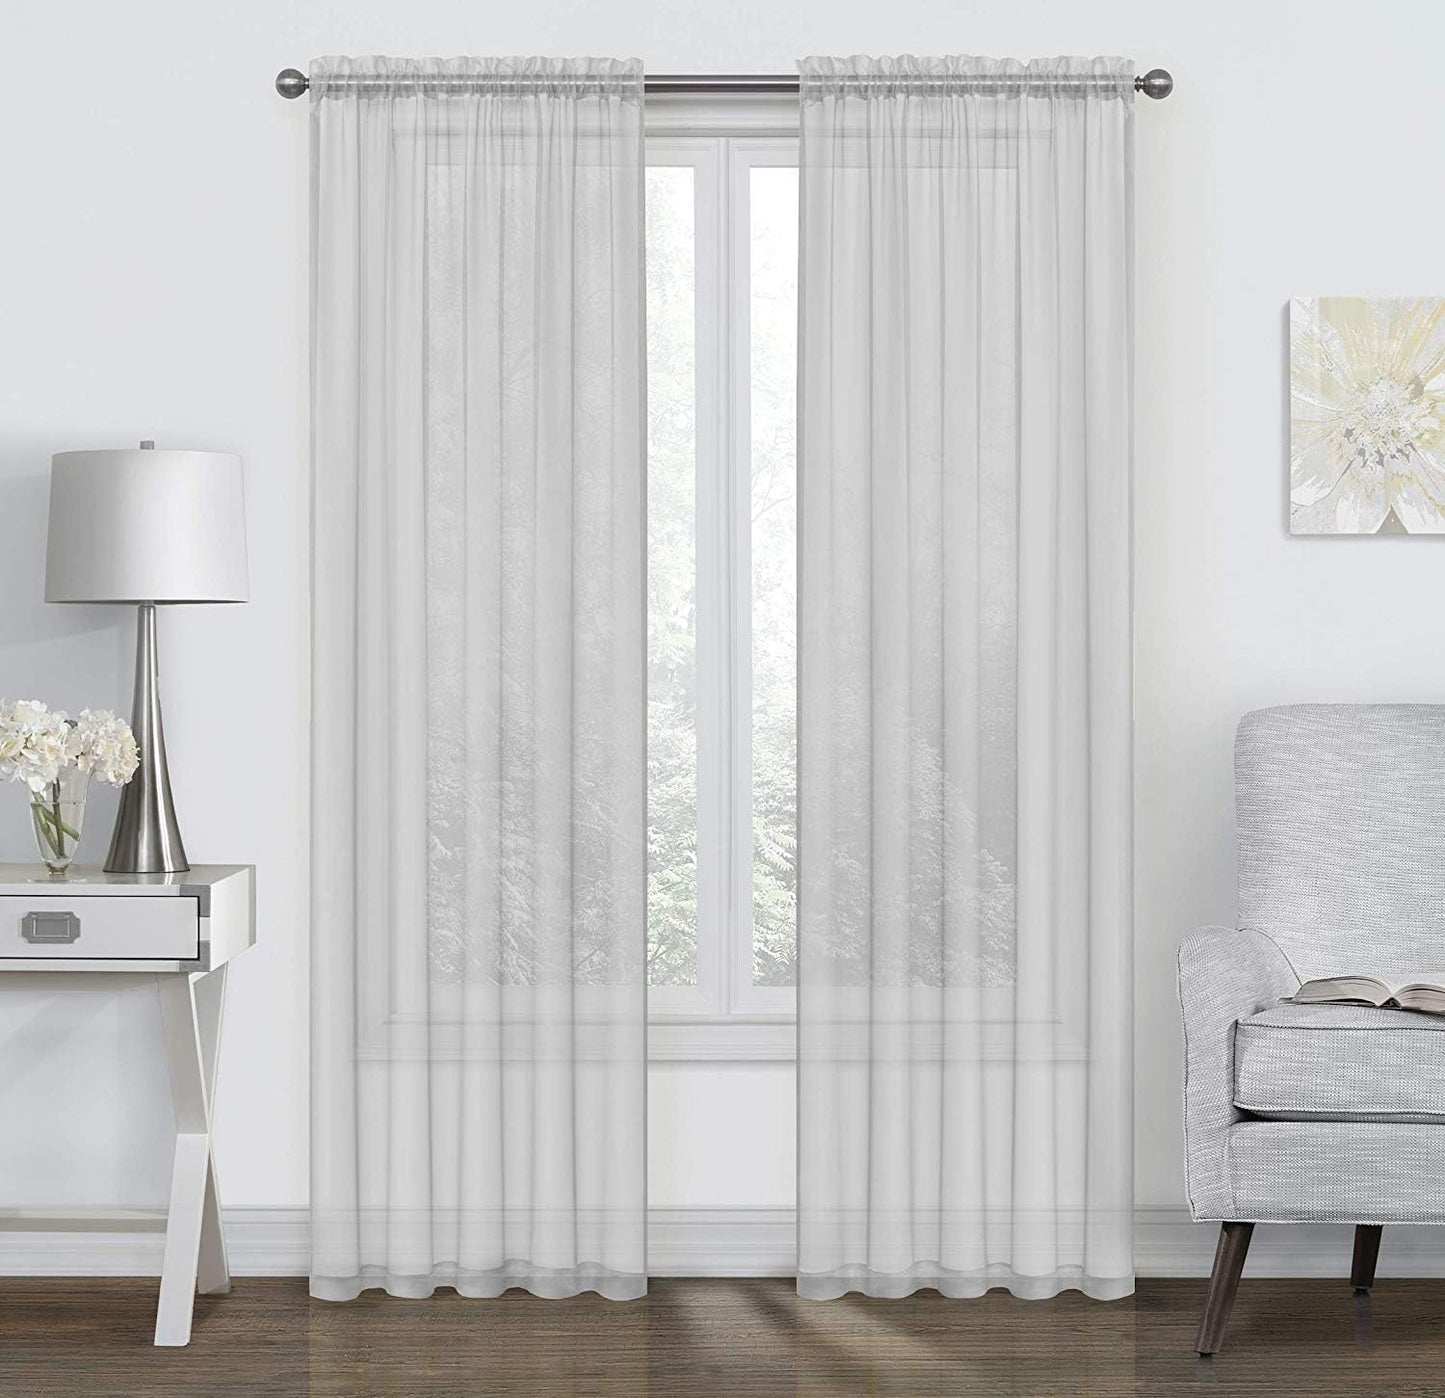 Goodgram 2 Pack: Basic Rod Pocket Sheer Voile Window Curtain Panels - Assorted Colors (White, 84 In. Long)  Goodgram Silver Contemporary 95 In. Long